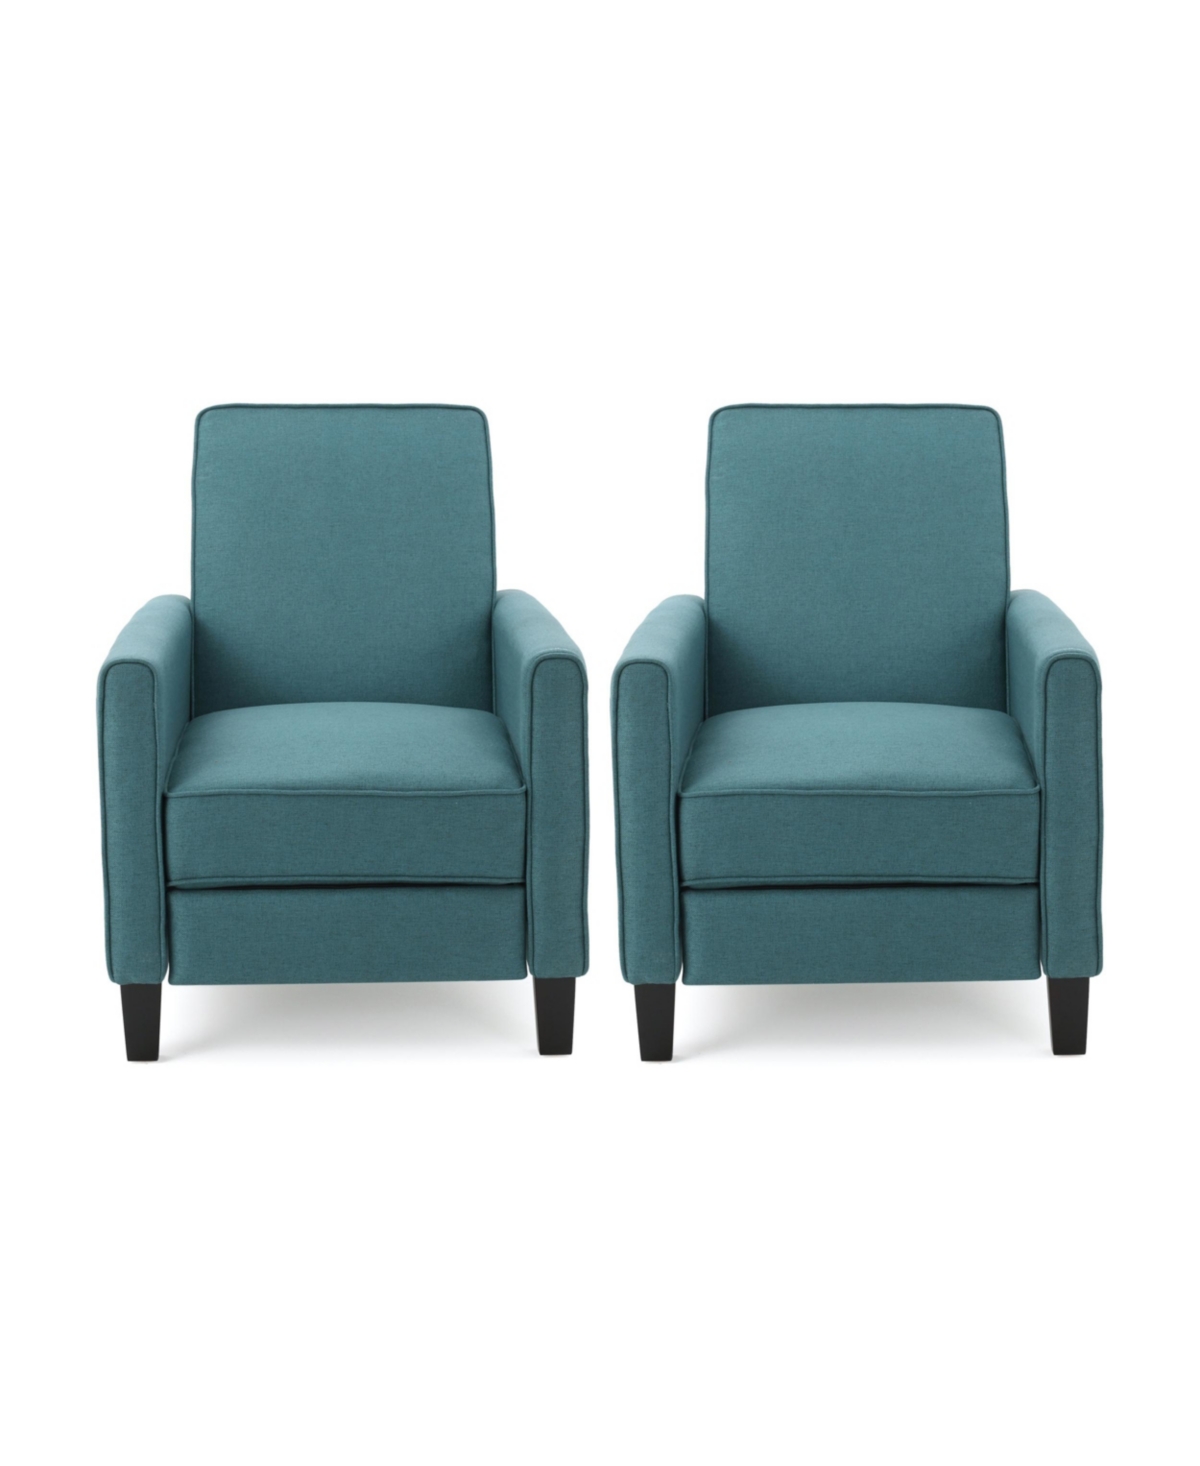 Noble House Darvis Contemporary Recliner Set, 2 Piece In Dark Teal